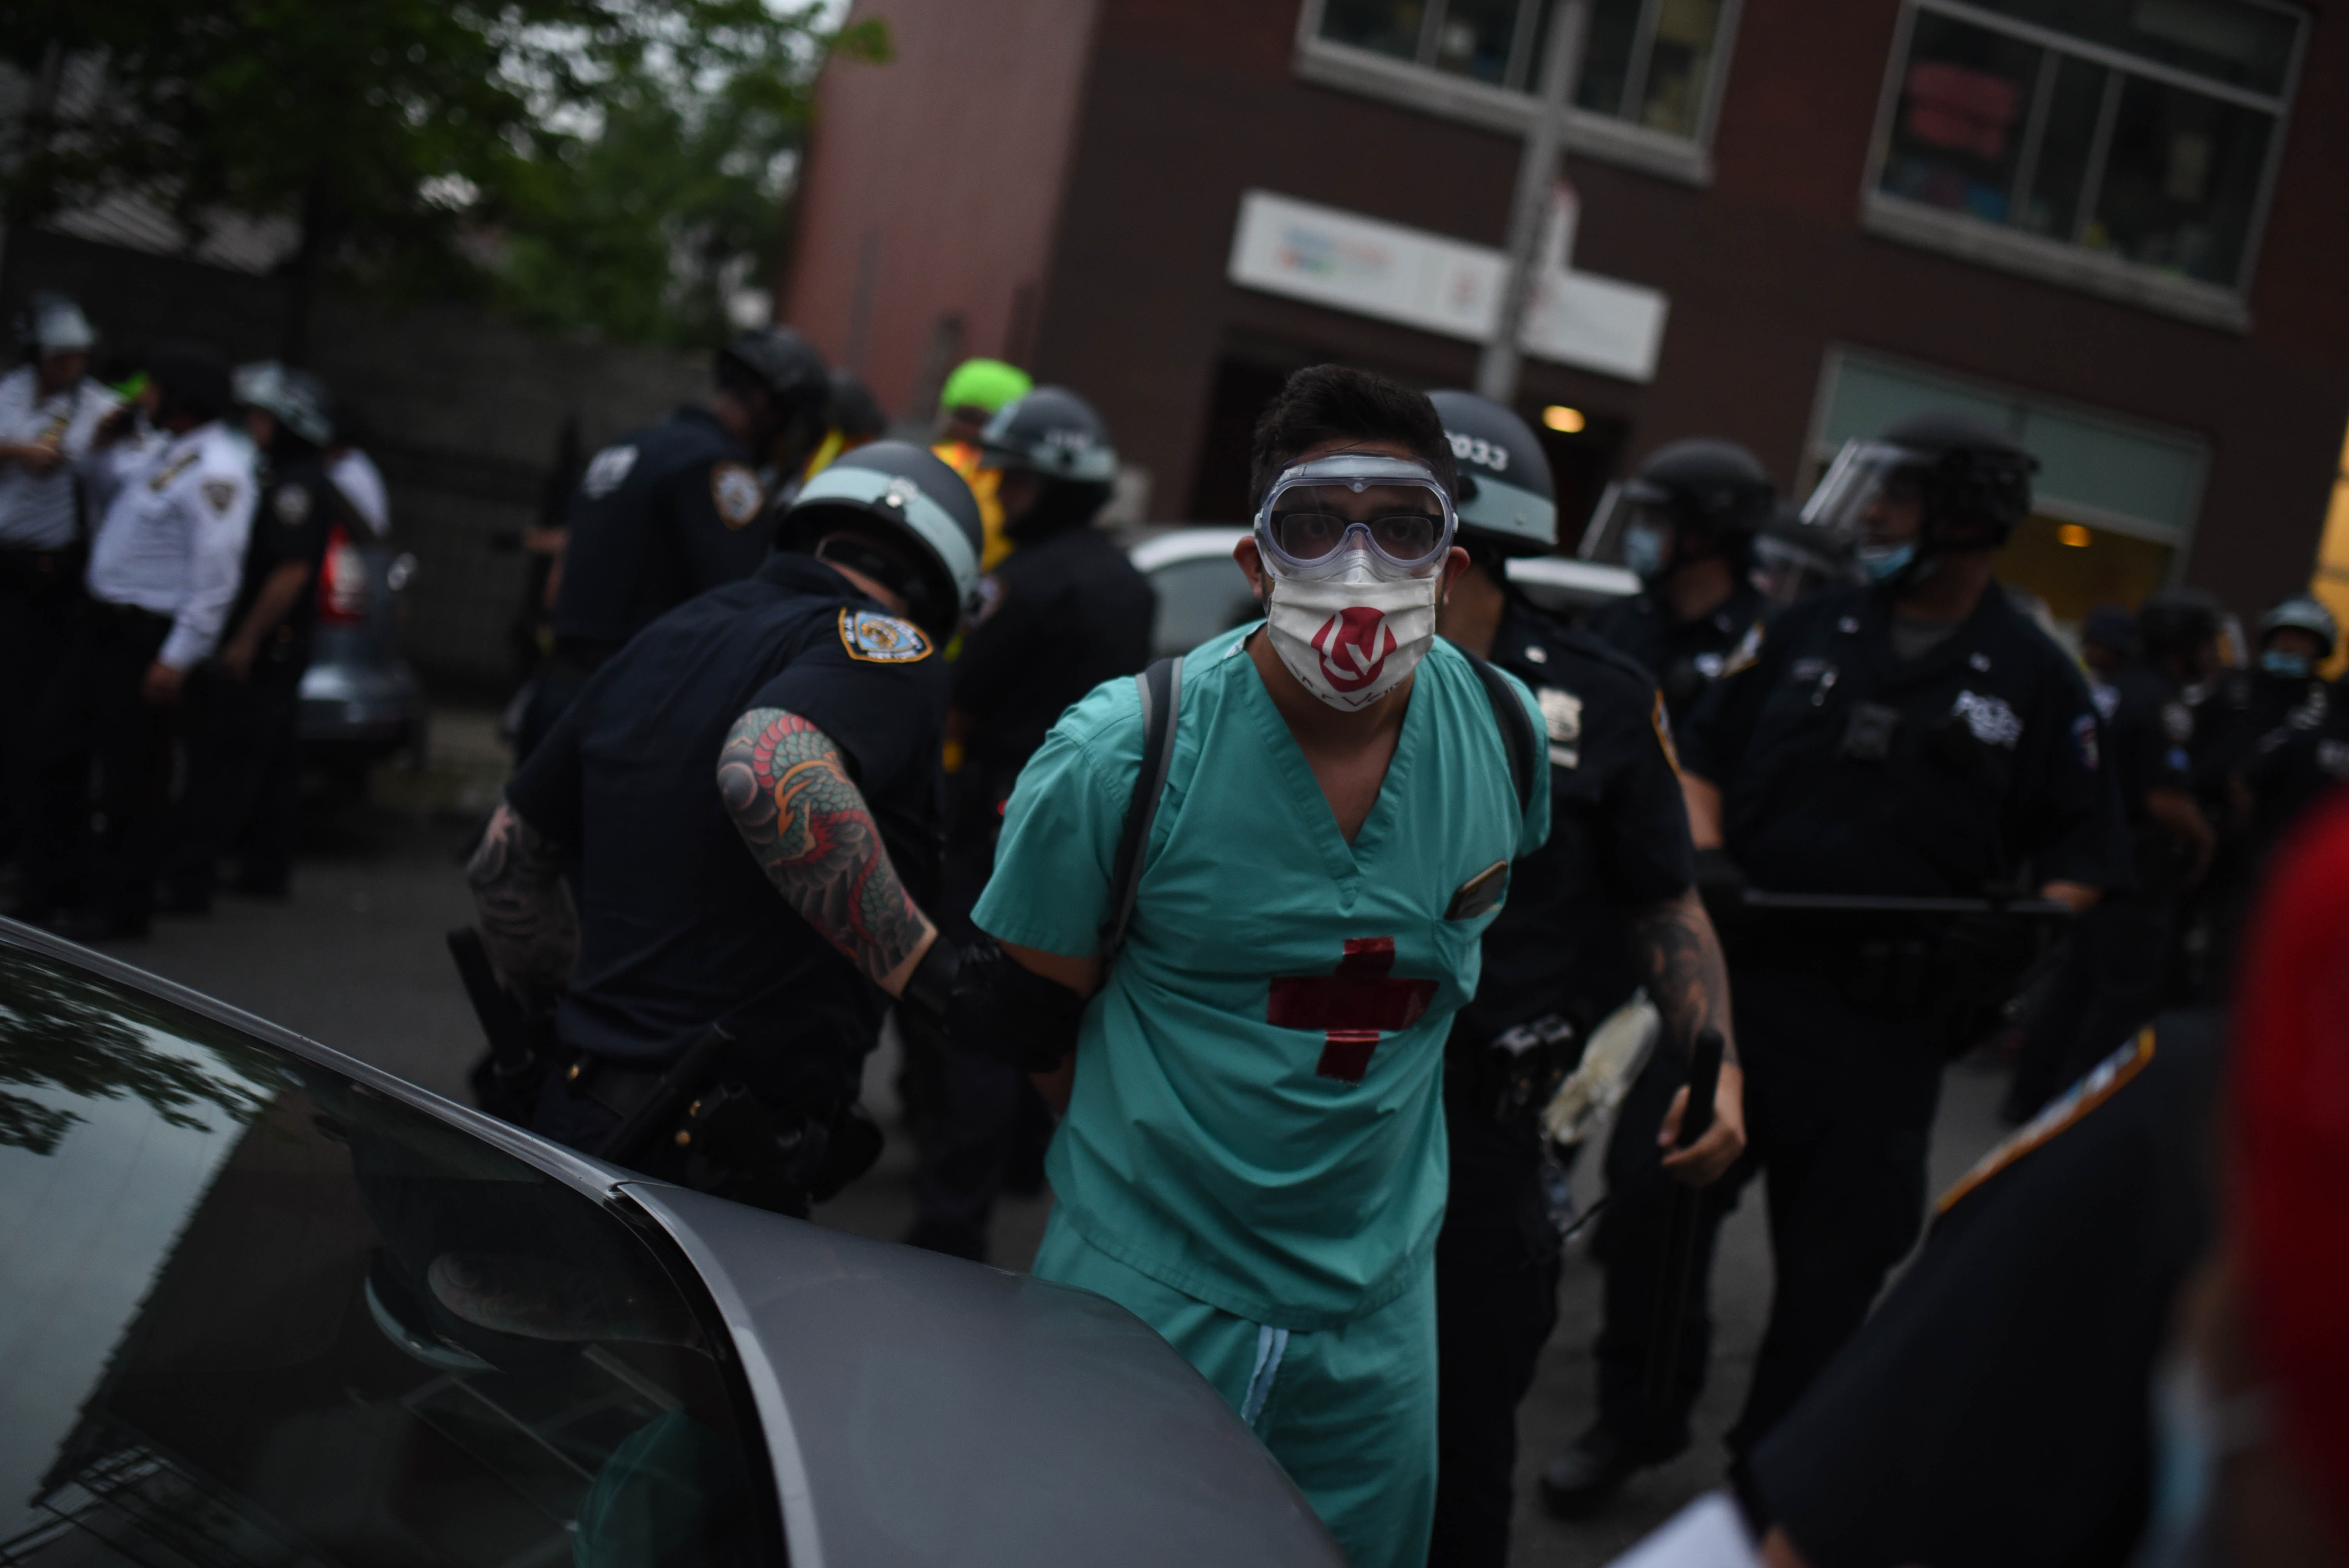 A man in a mask and hospital scrubs is handcuffed by police officers